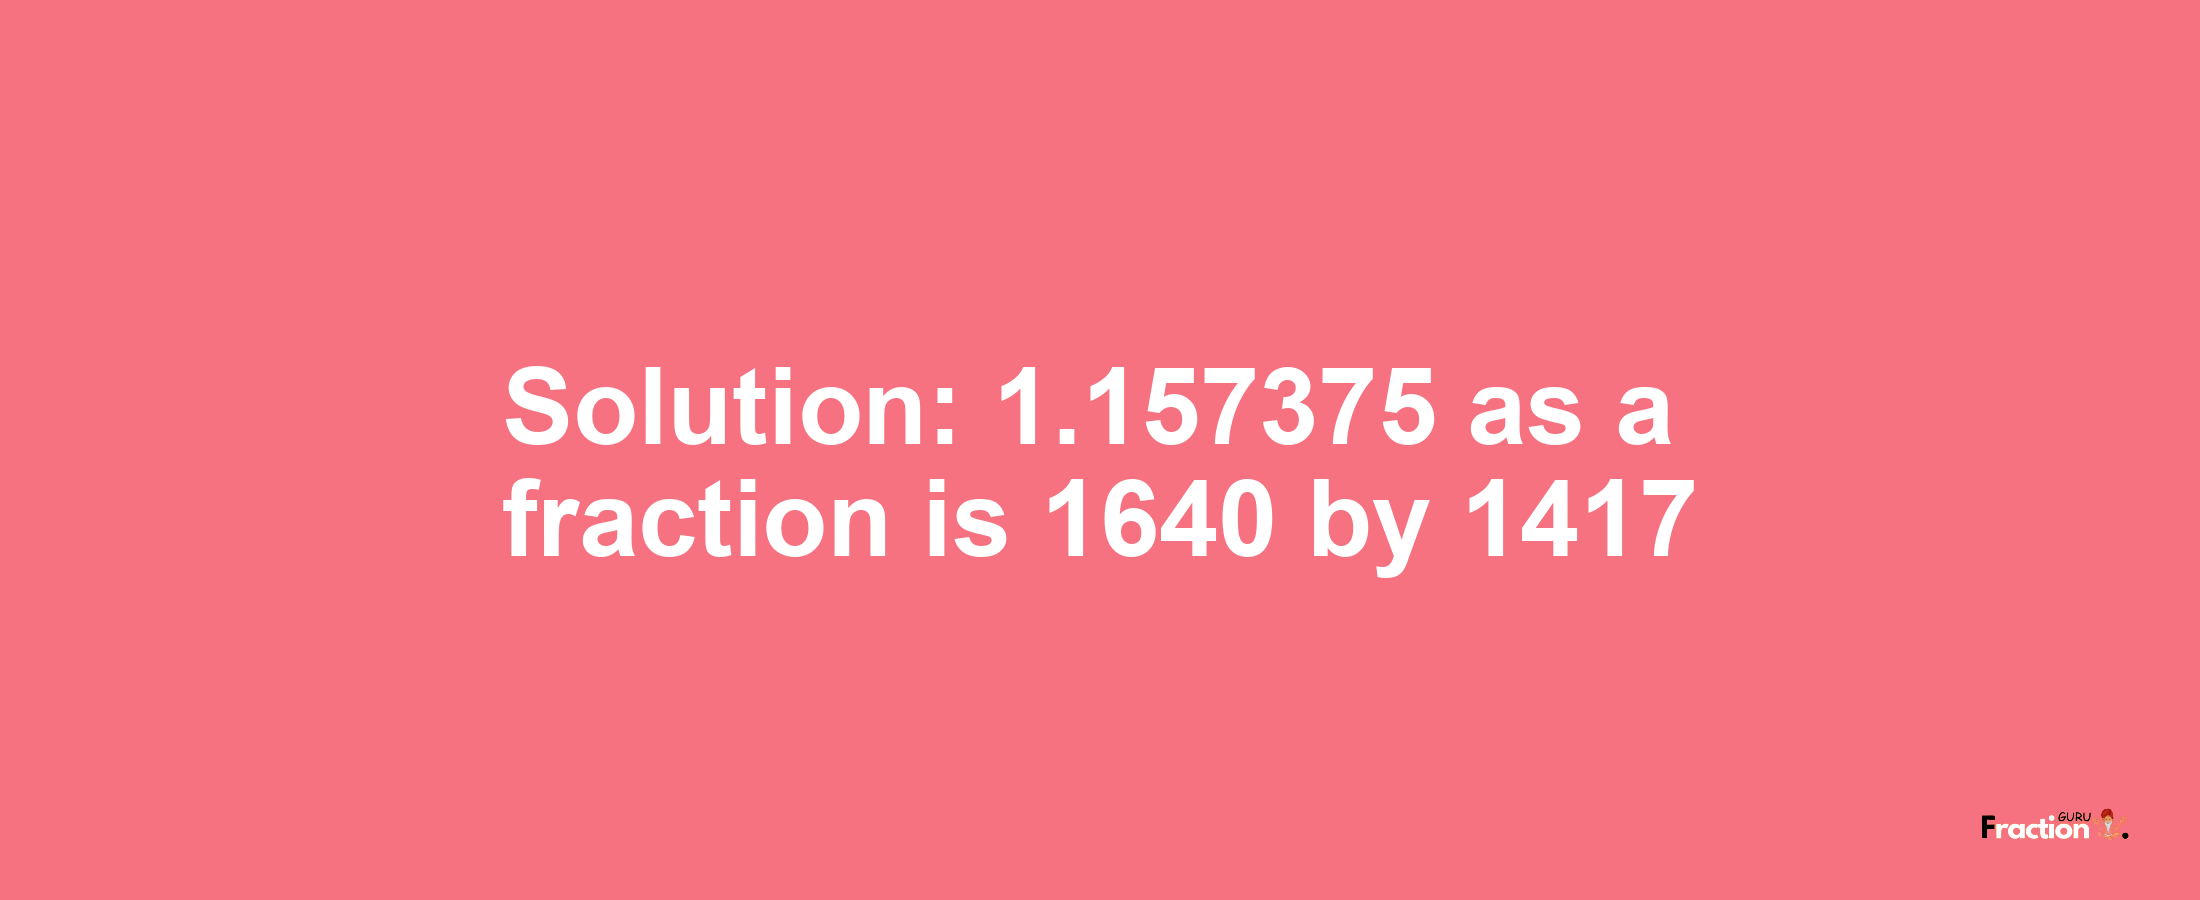 Solution:1.157375 as a fraction is 1640/1417